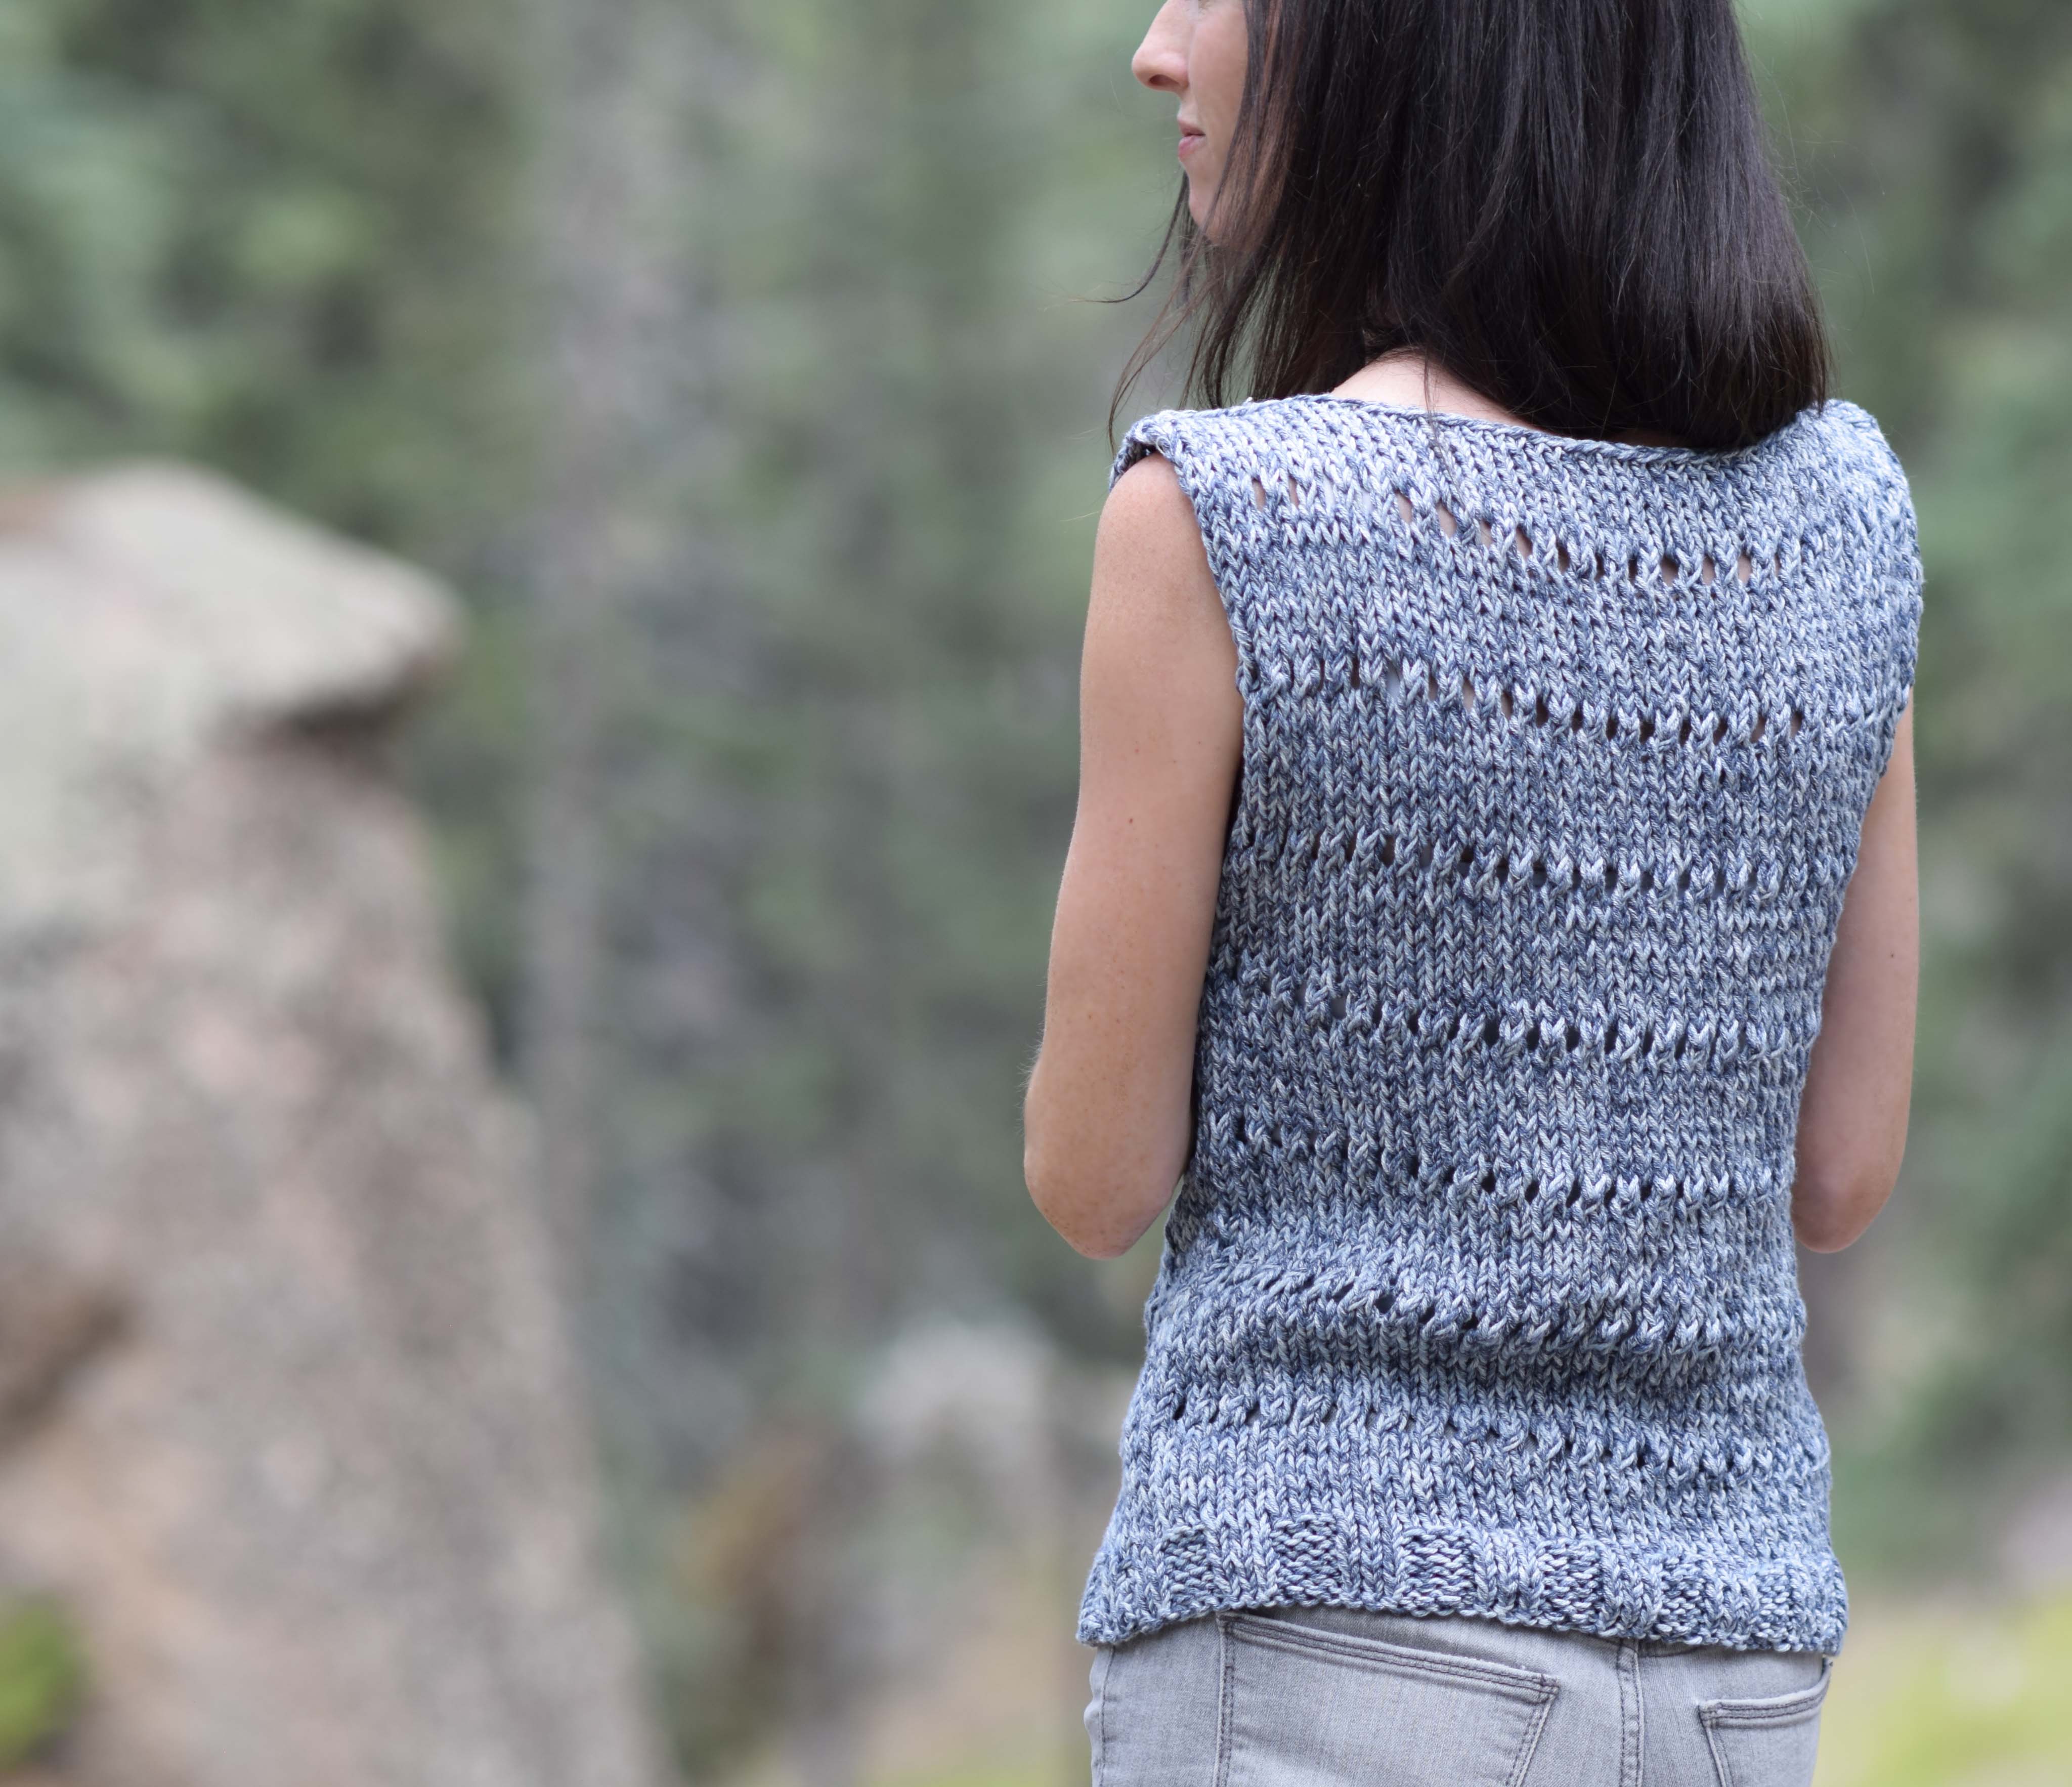 Eyelet Sleeveless Top Easy Knitting Pattern – Mama In A Stitch